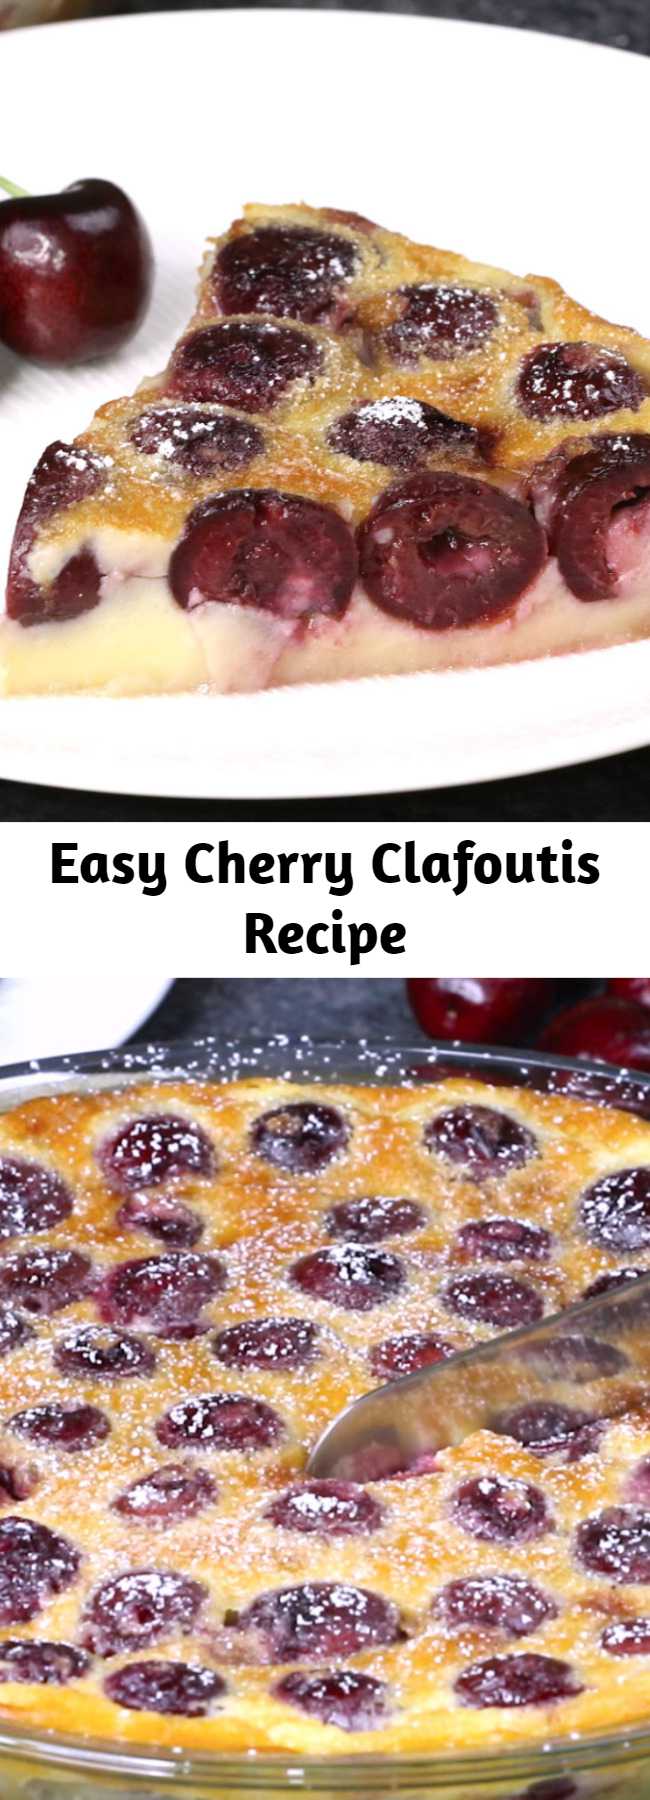 Easy Cherry Clafoutis Recipe - Cherry Clafoutis is a classic French dessert of fresh cherries baked in a dense, flan-like custard. This clafoutis recipe is surprisingly simple to make. When it’s cherry season, give this clafoutis a try!